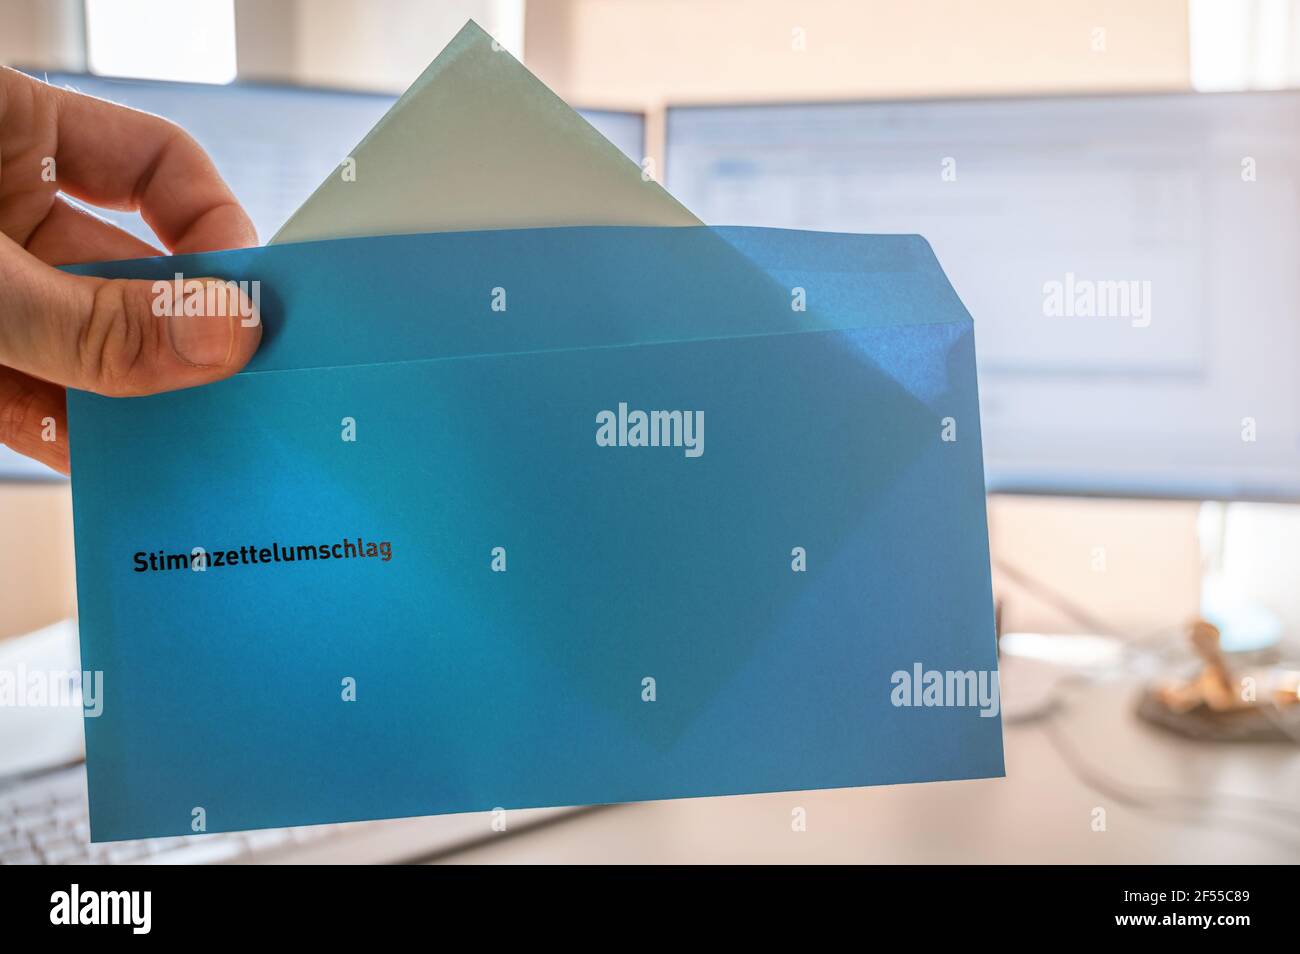 Casting one vote in the election for the new staff council with an envelope as postal vote with the word voting envelope in german language Stock Photo